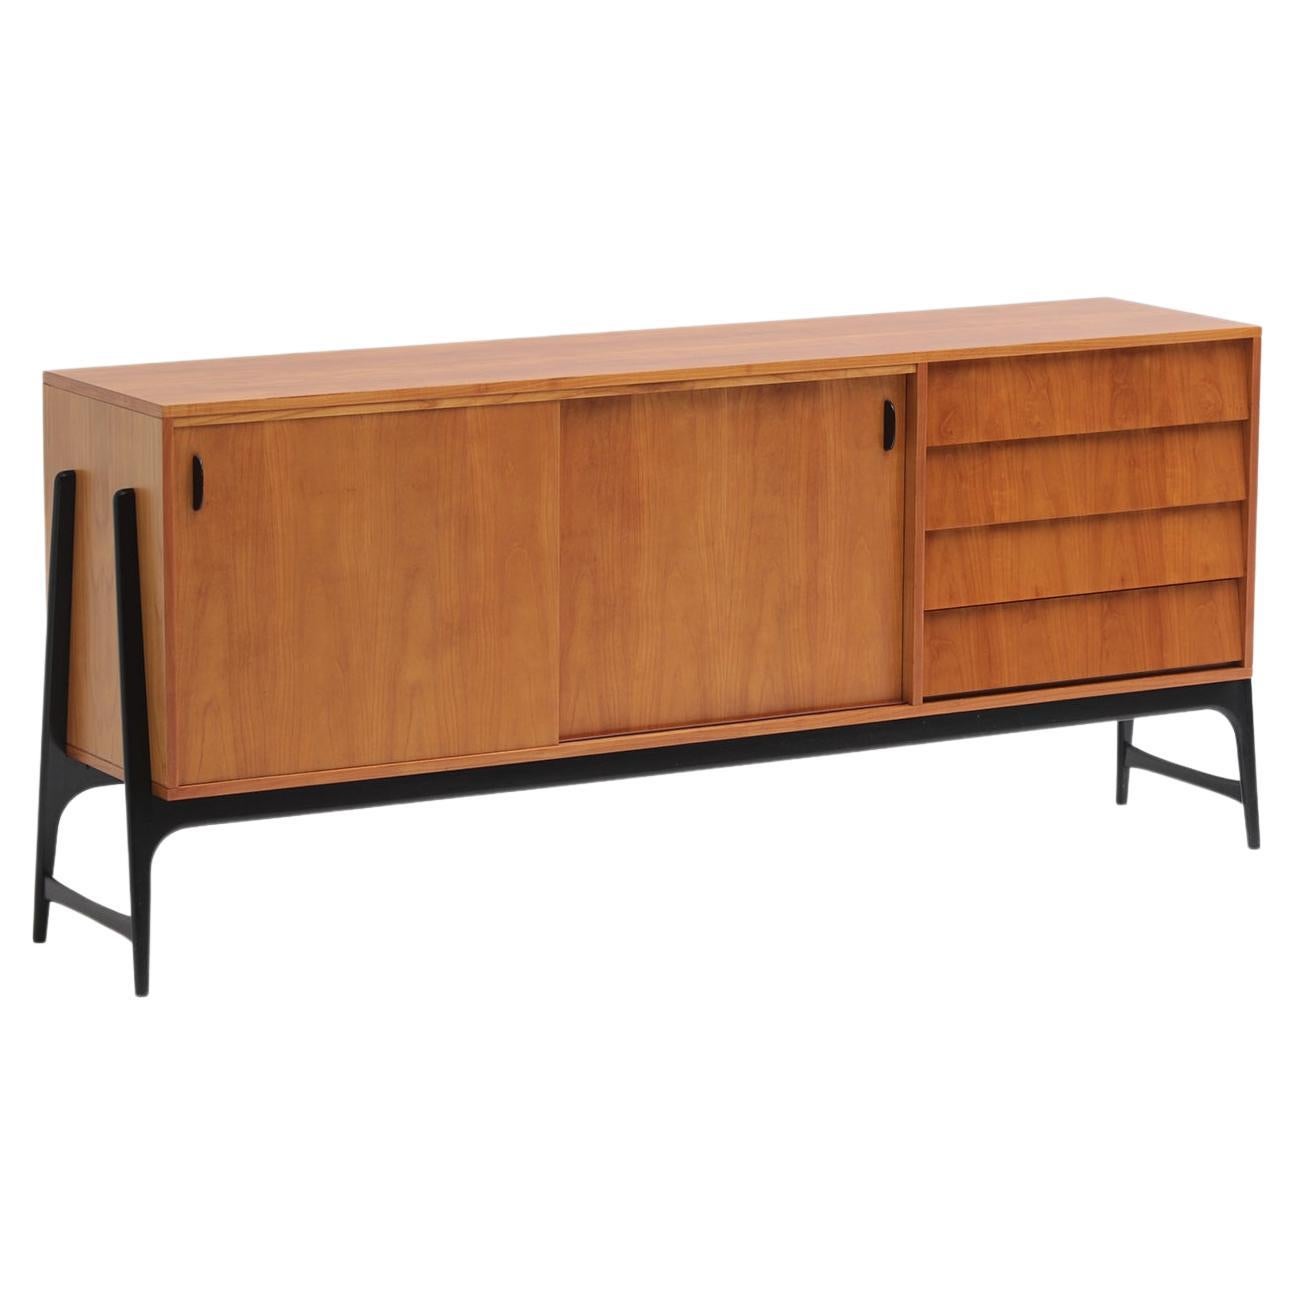 Unique midcentury sideboard by Alfred Hendrickx designed in 1958 for Belform For Sale